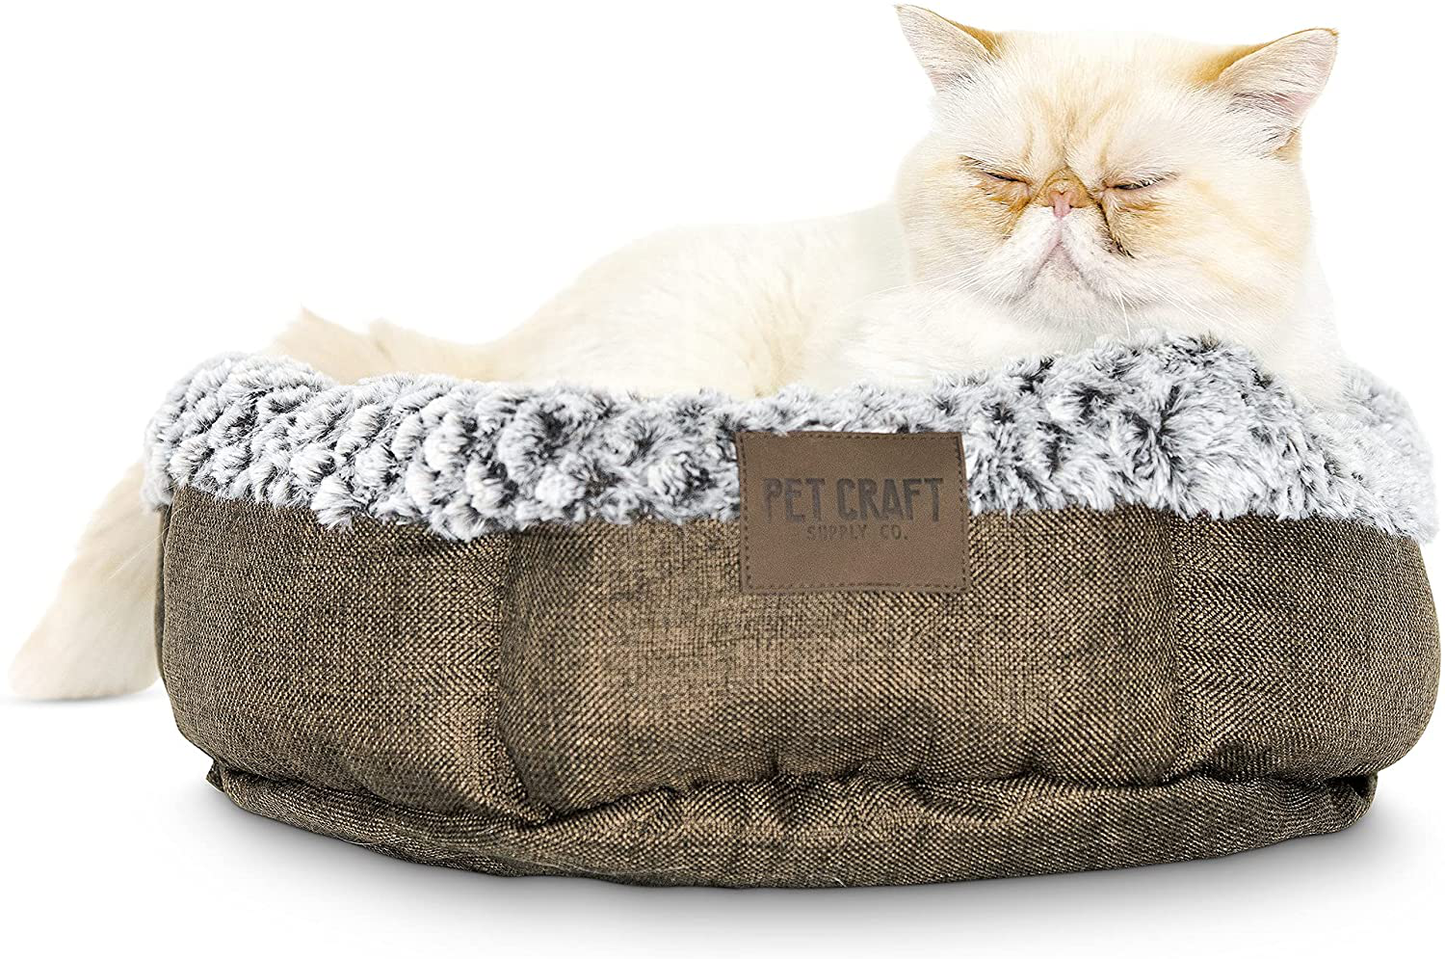 Pet Craft Supply Soho round Dog Bed for Small Dogs - Cat Bed for Indoor Cats | Ultra Soft Plush | Memory Foam | Machine Washable | Puppy Bed | Pet Bed | Calming Cat Bed | Calming Bed for Dogs